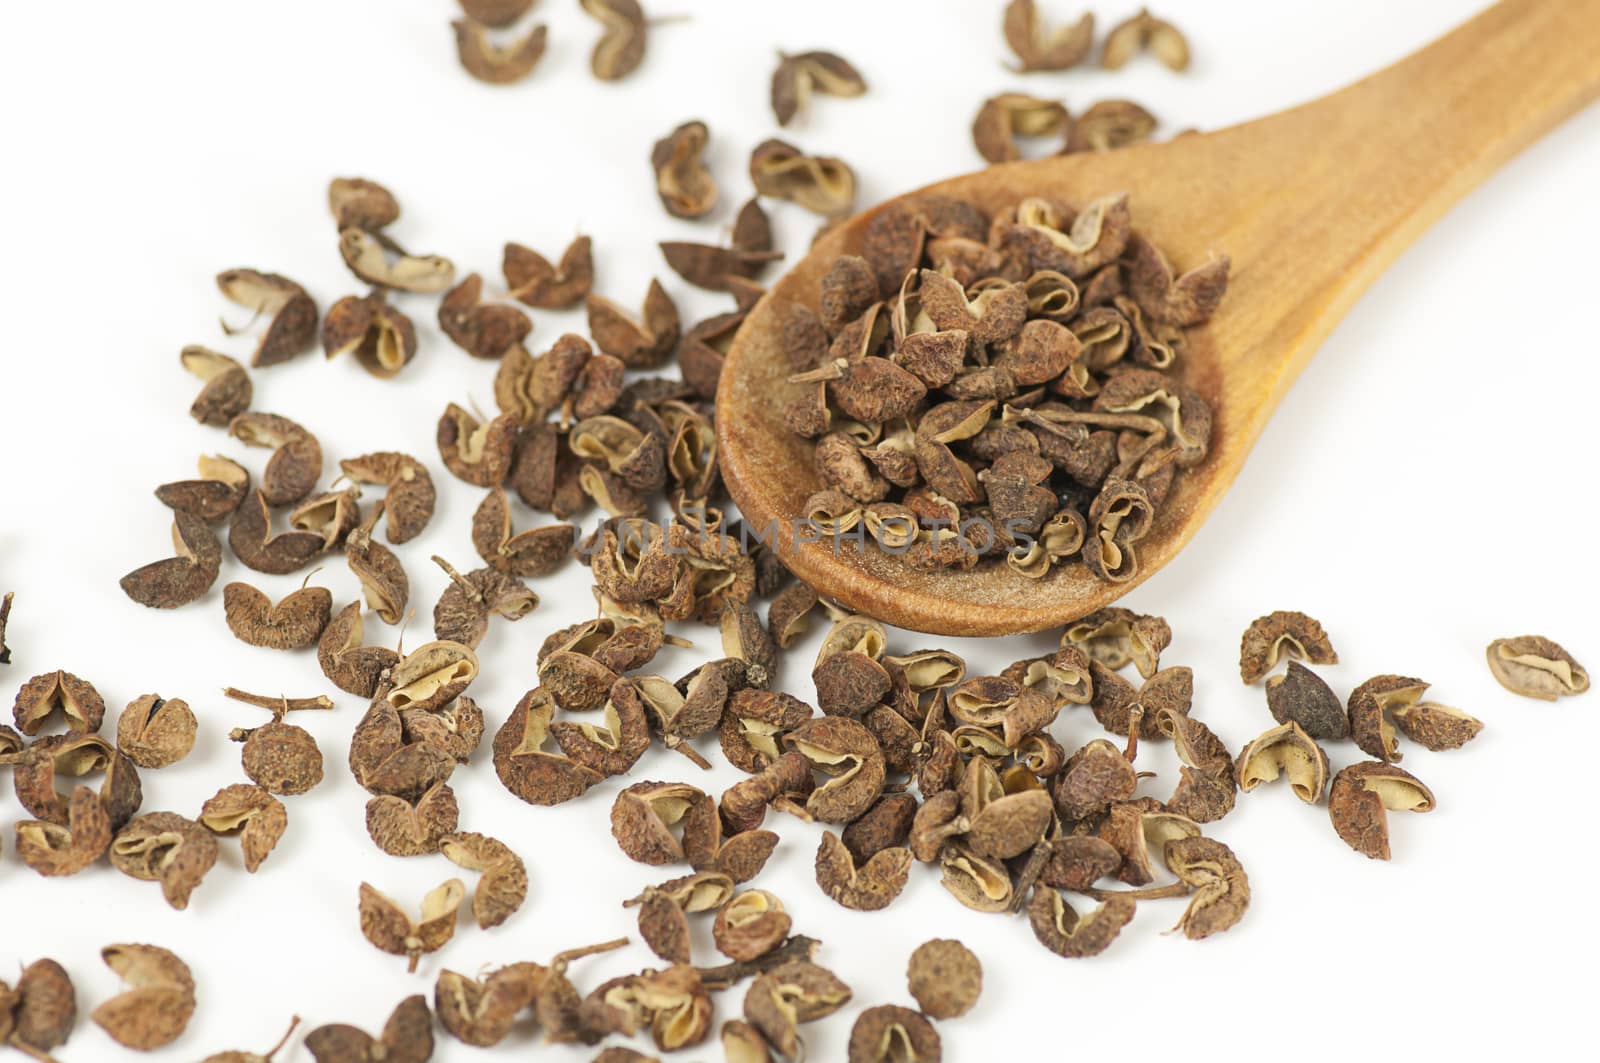 Sichuan pepper (dried seeds) close up on white